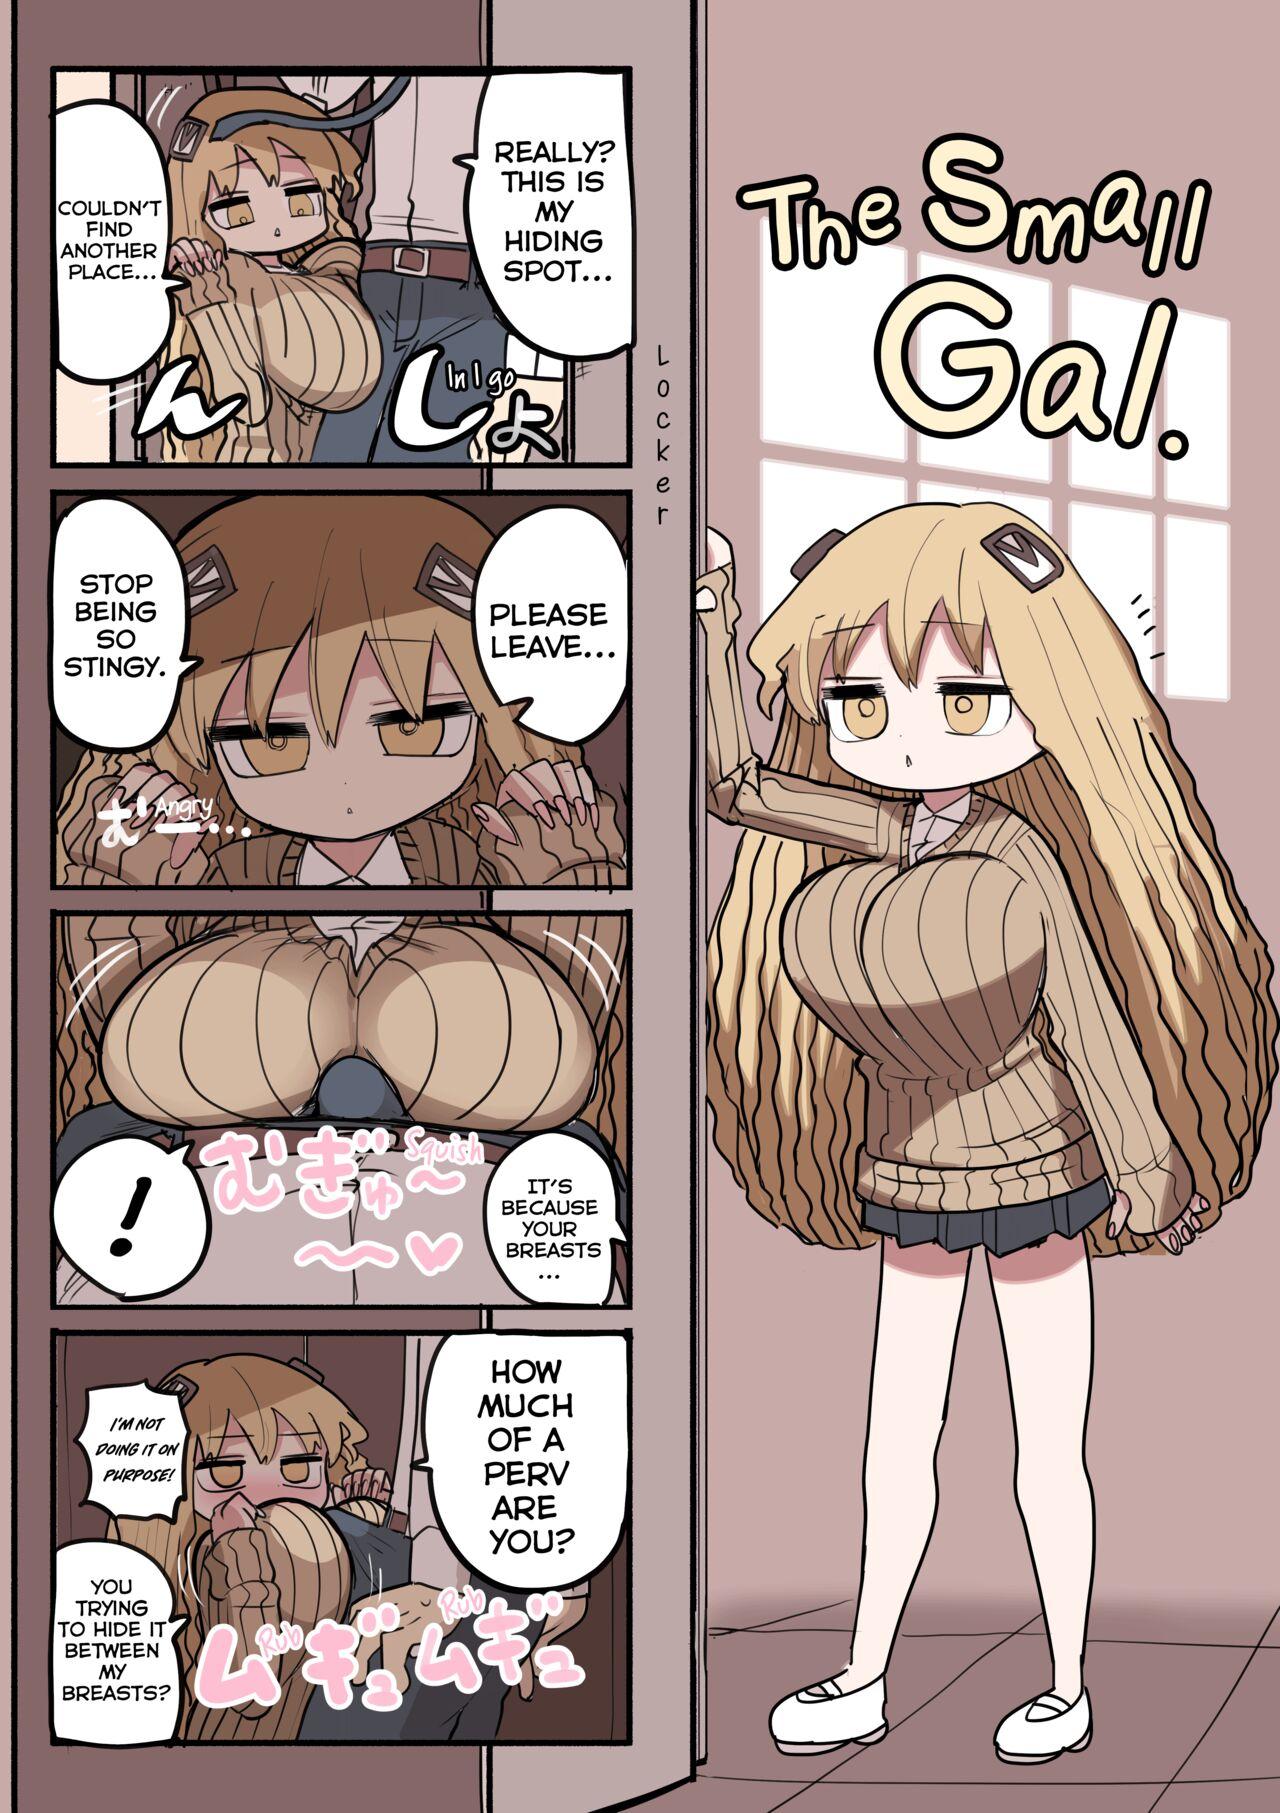 Chiisai Gal | The Small Gal 14